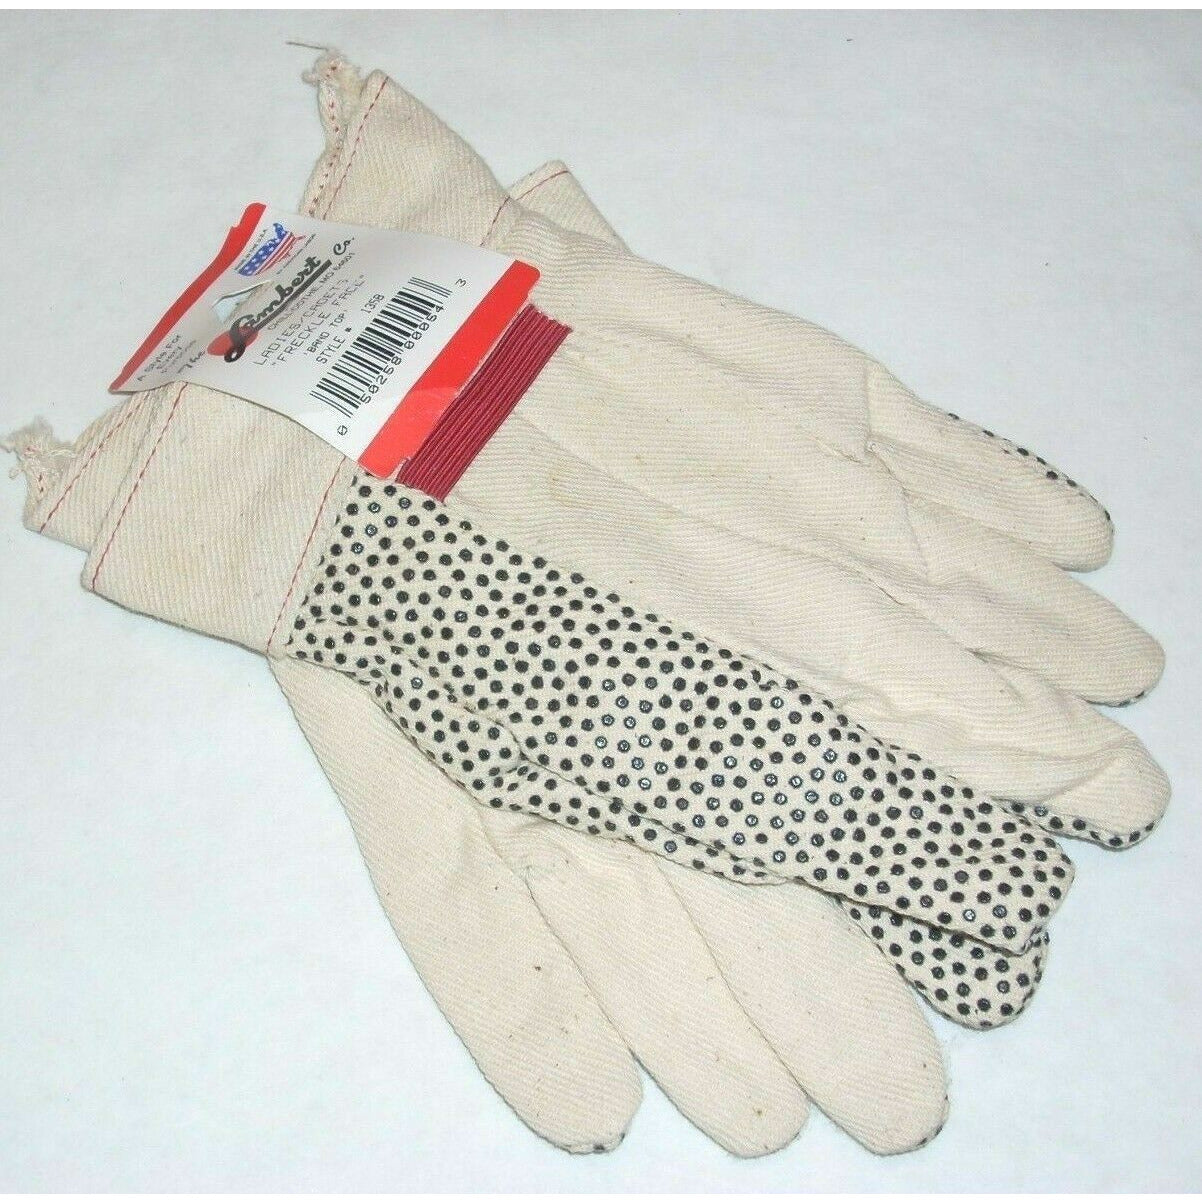 Lambert 135B Dotted Palm Canvas Gloves Band Top Cuff Ladies Cadets Size USA Made